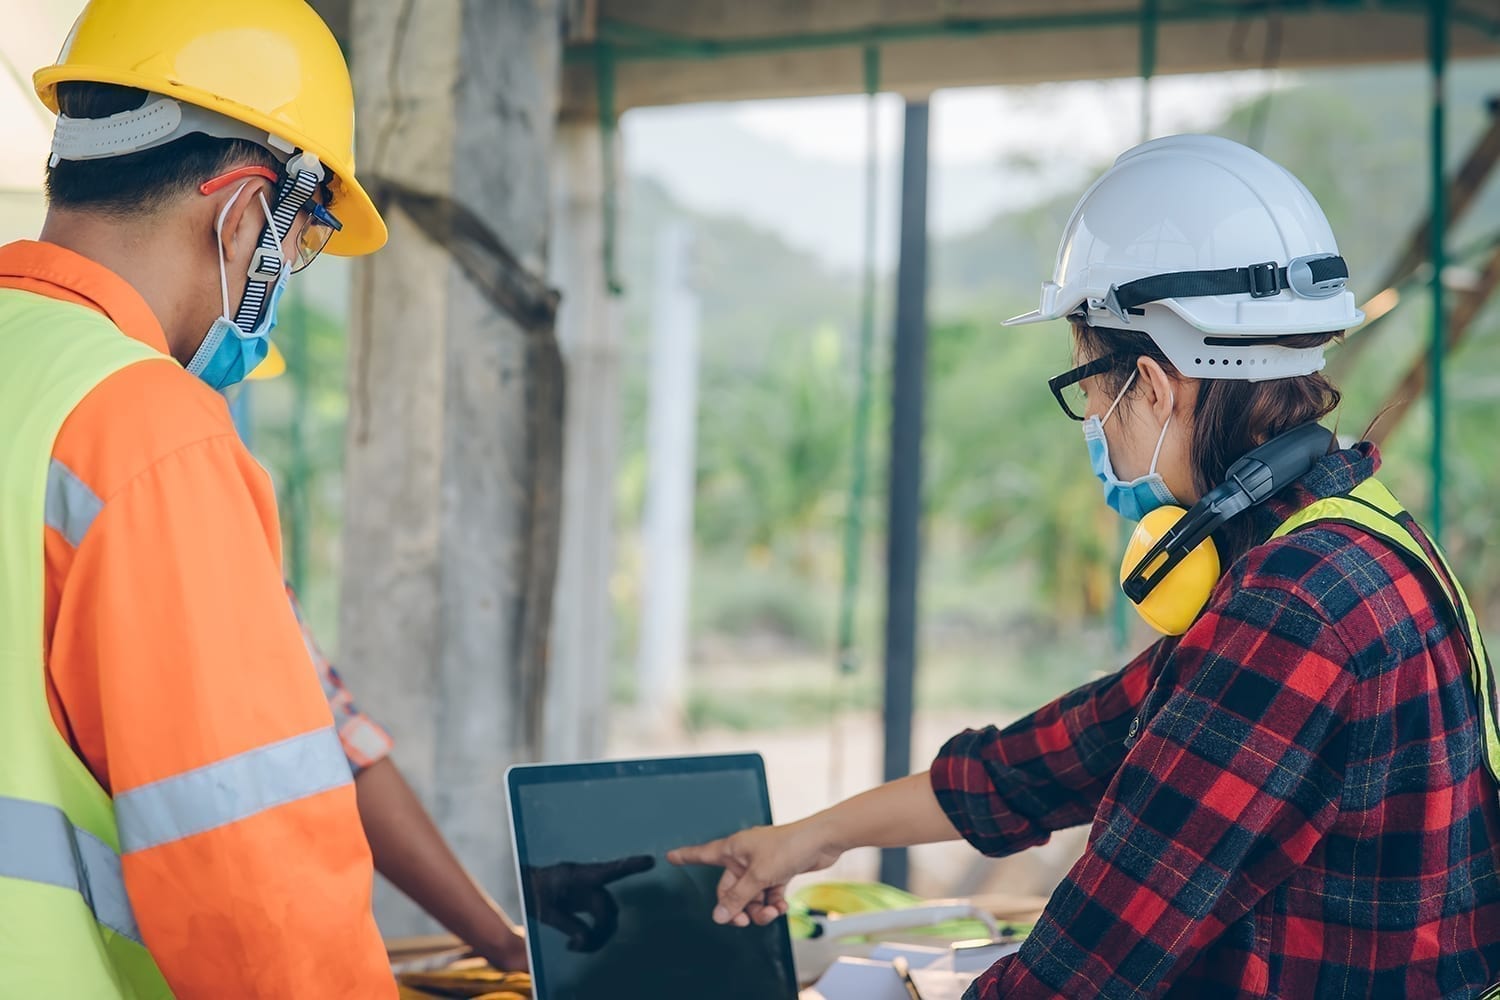 New OSHA guidelines on COVID-19 safety for construction sites | 5 key takeaways